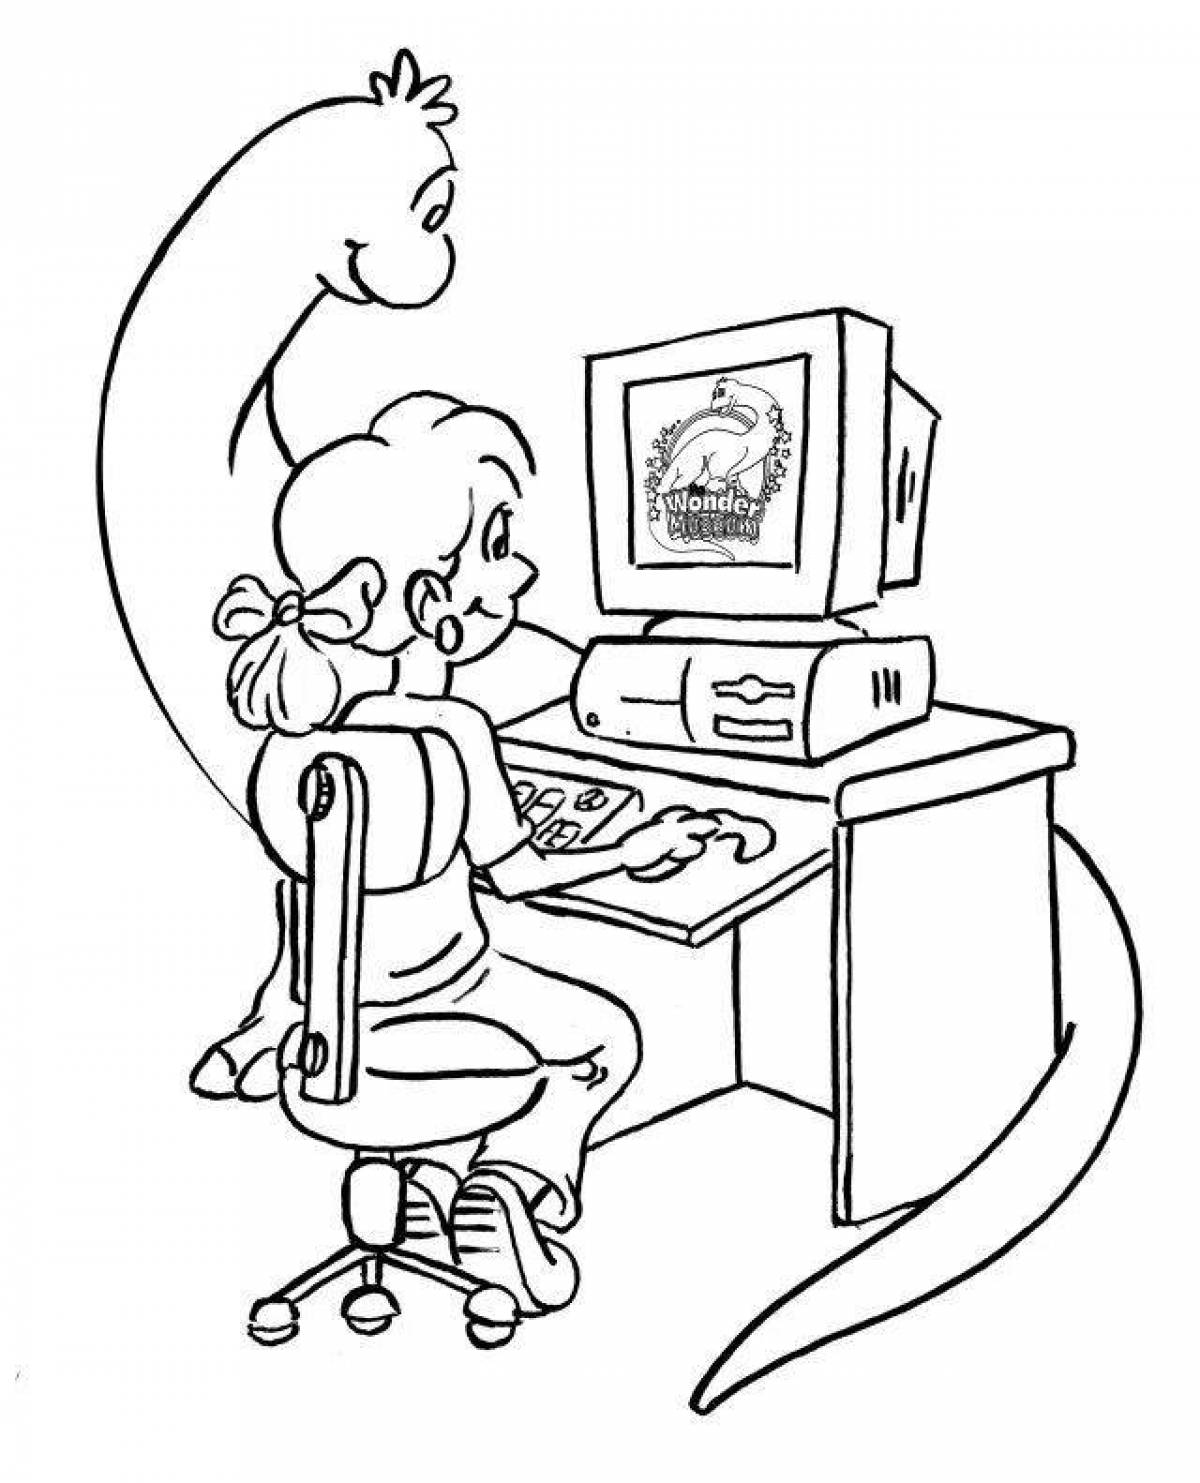 Nice computer mouse coloring pages for girls